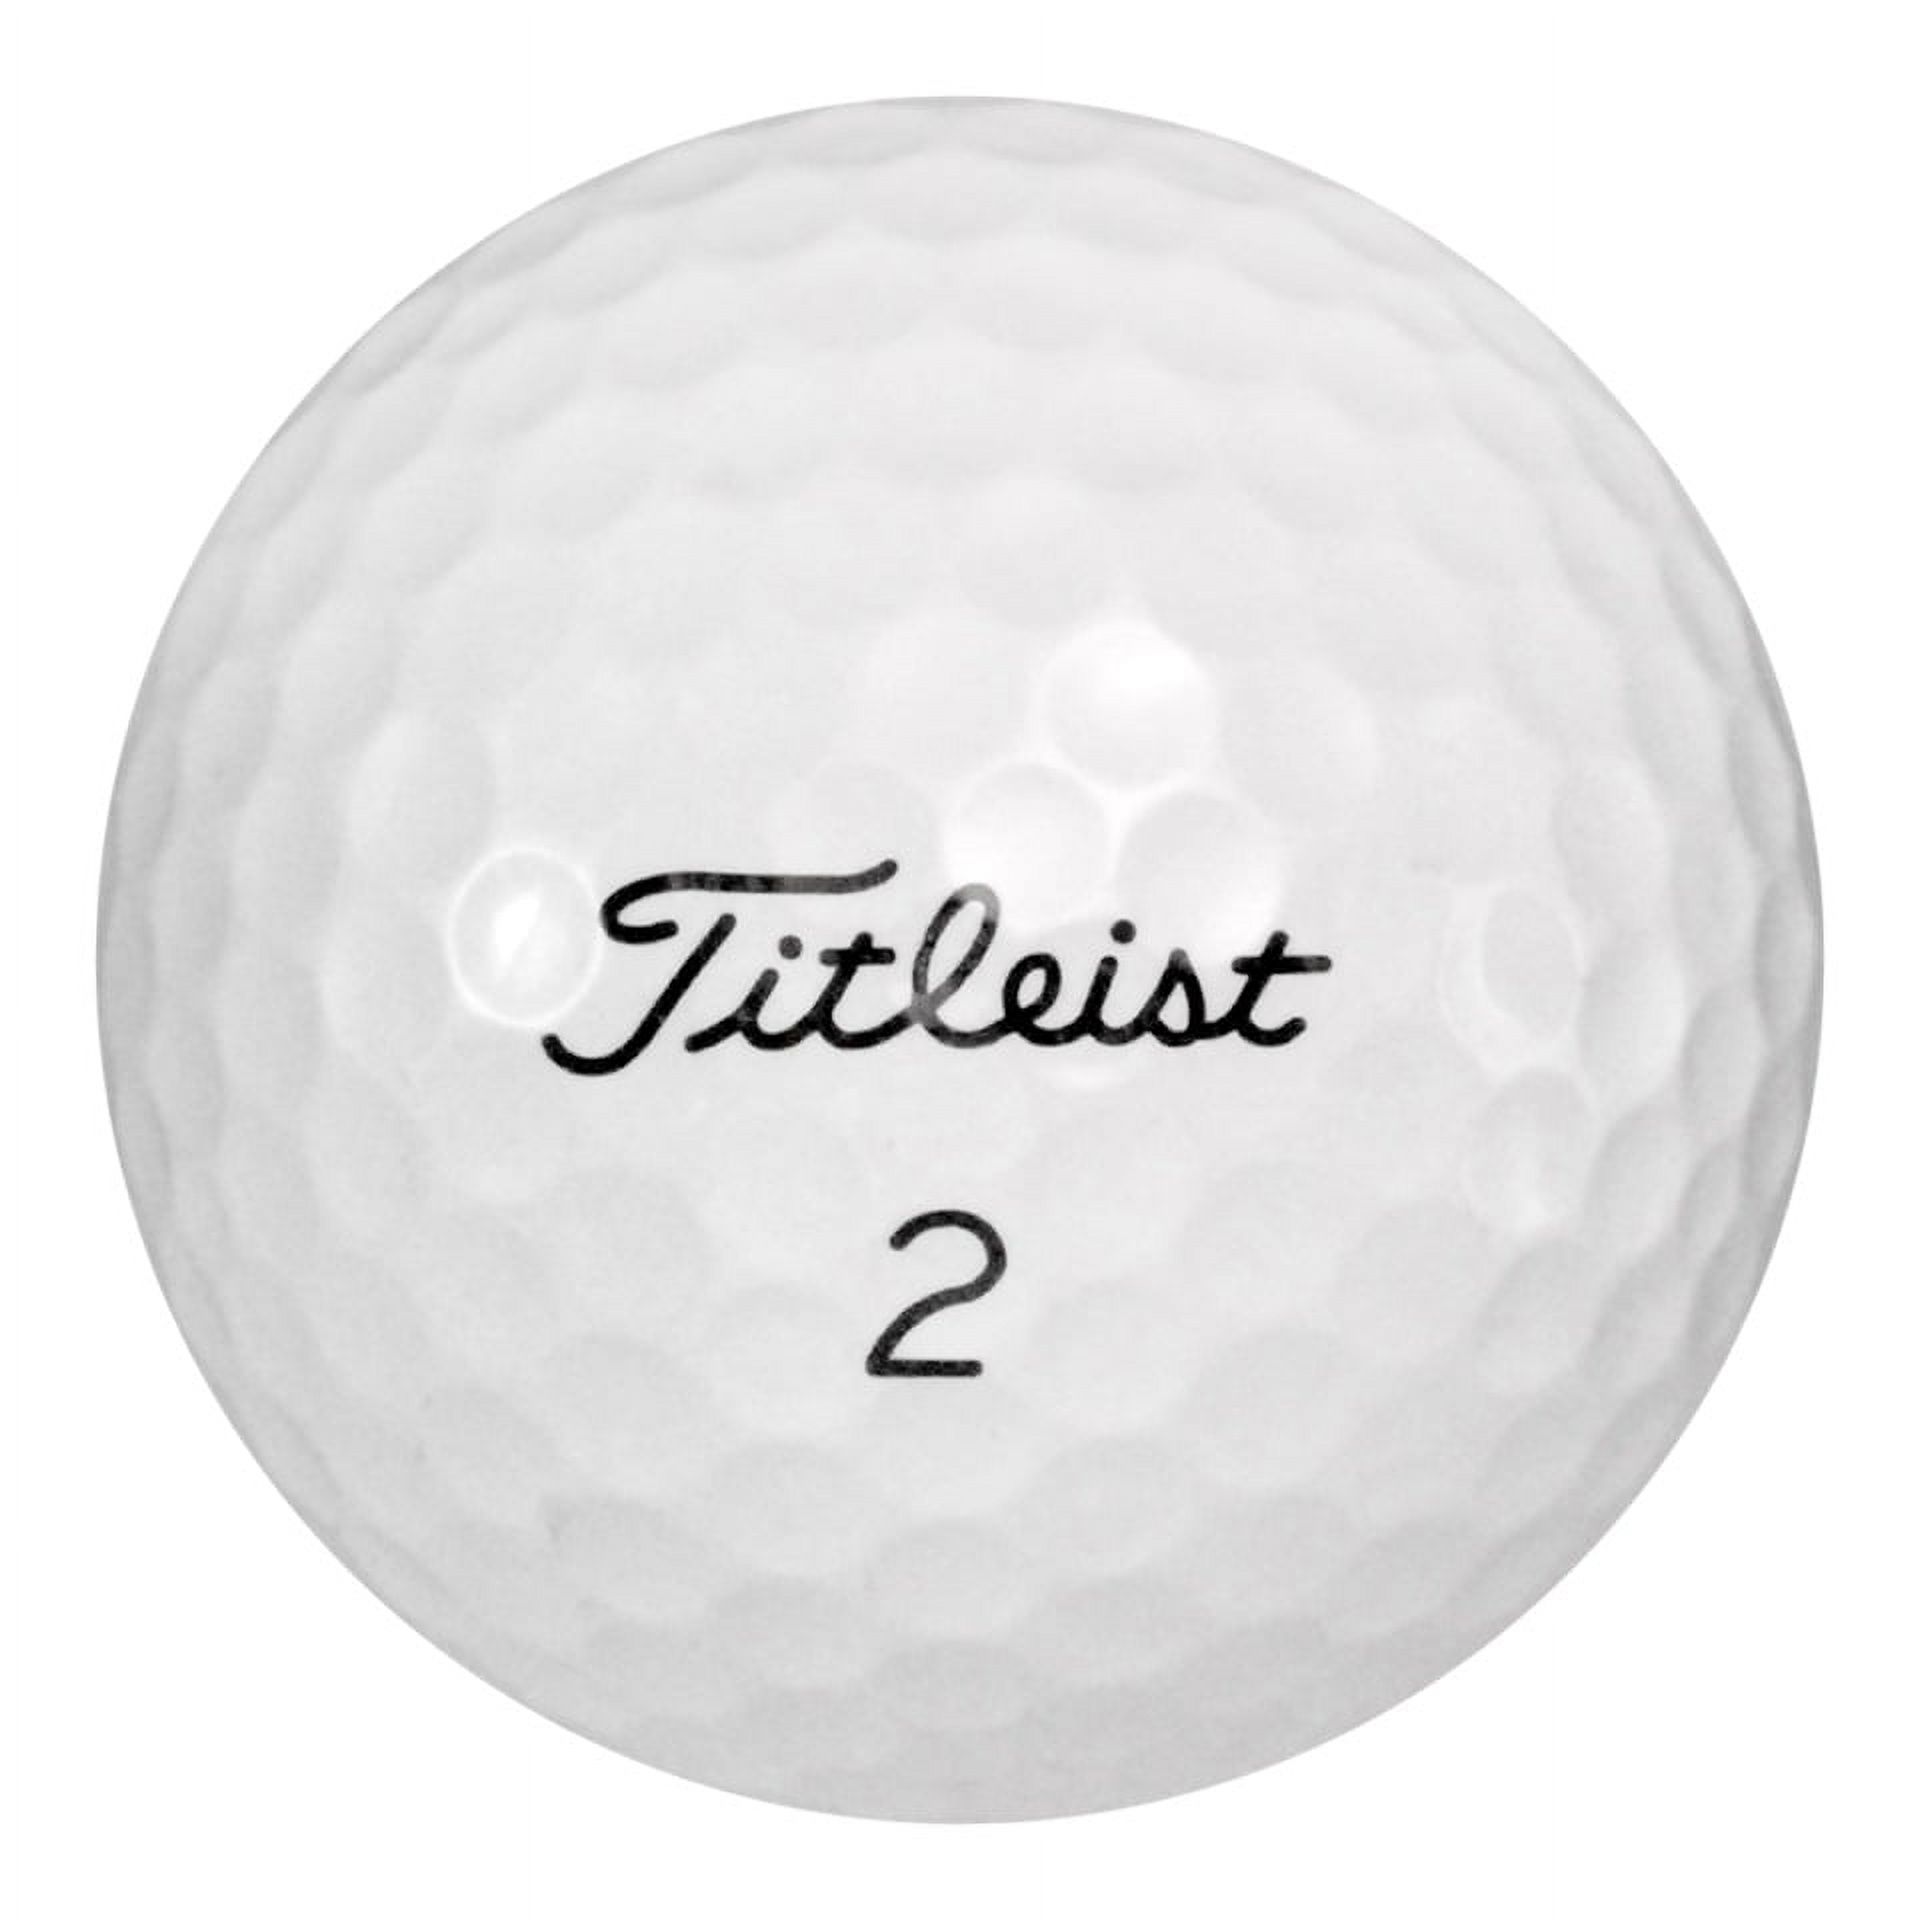 Titleist Pro V1 Golf Balls, Used, Good Quality, 132 Pack - image 2 of 3